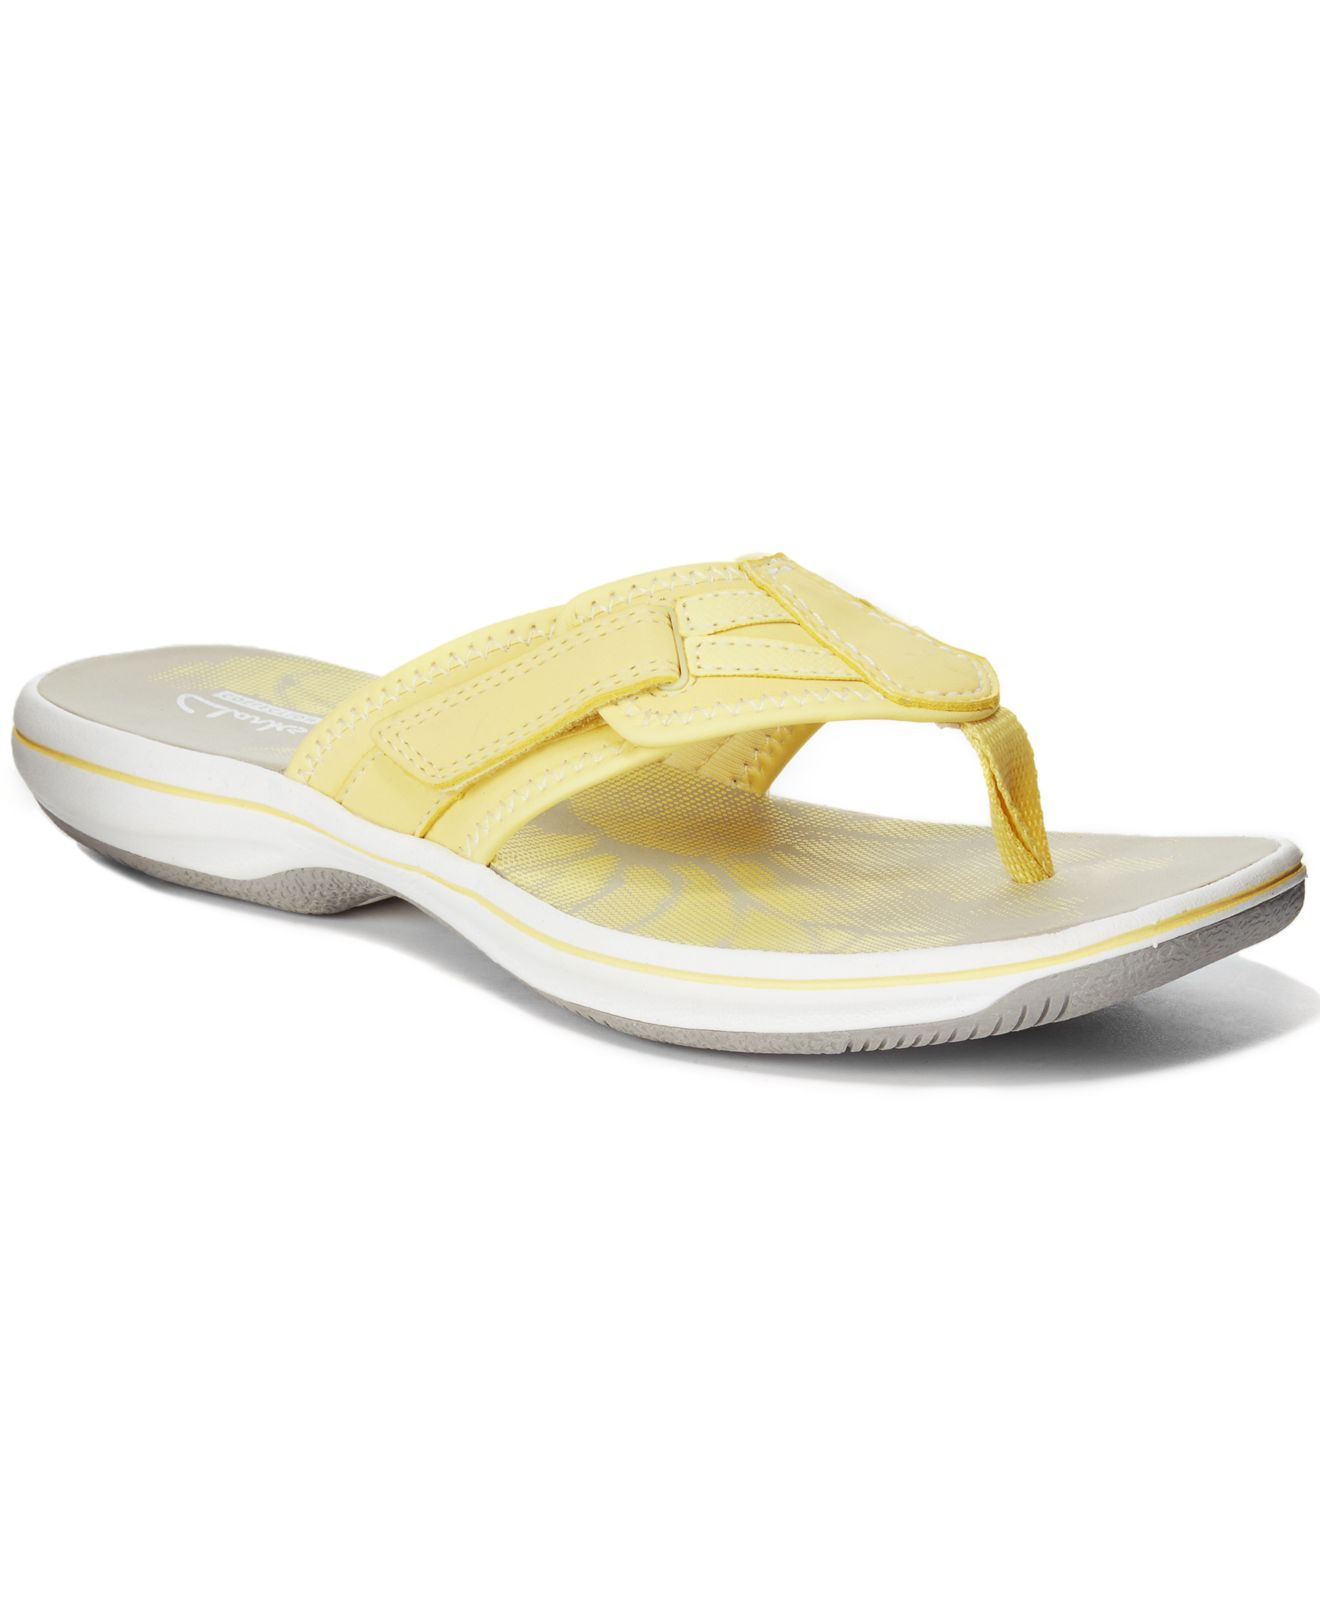 Lyst - Clarks Collection Women's Brinkley Athol Flip Flops in Yellow